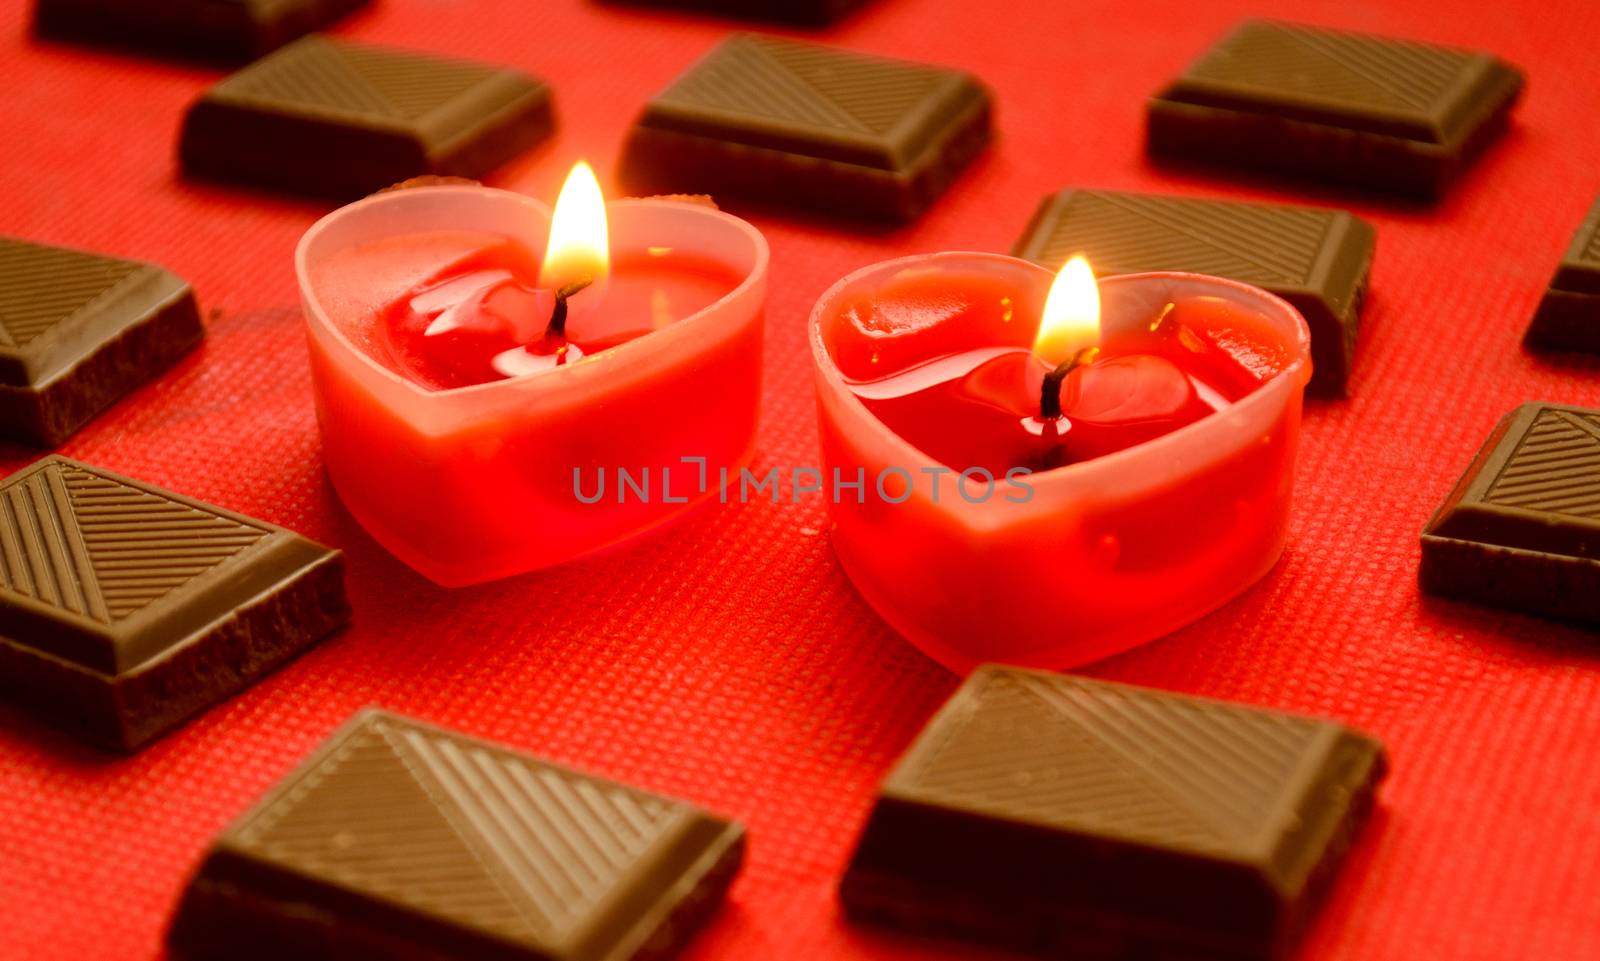 Two love burning hearts with chocolate bars on red background.Merry Valentine Day for lovers.